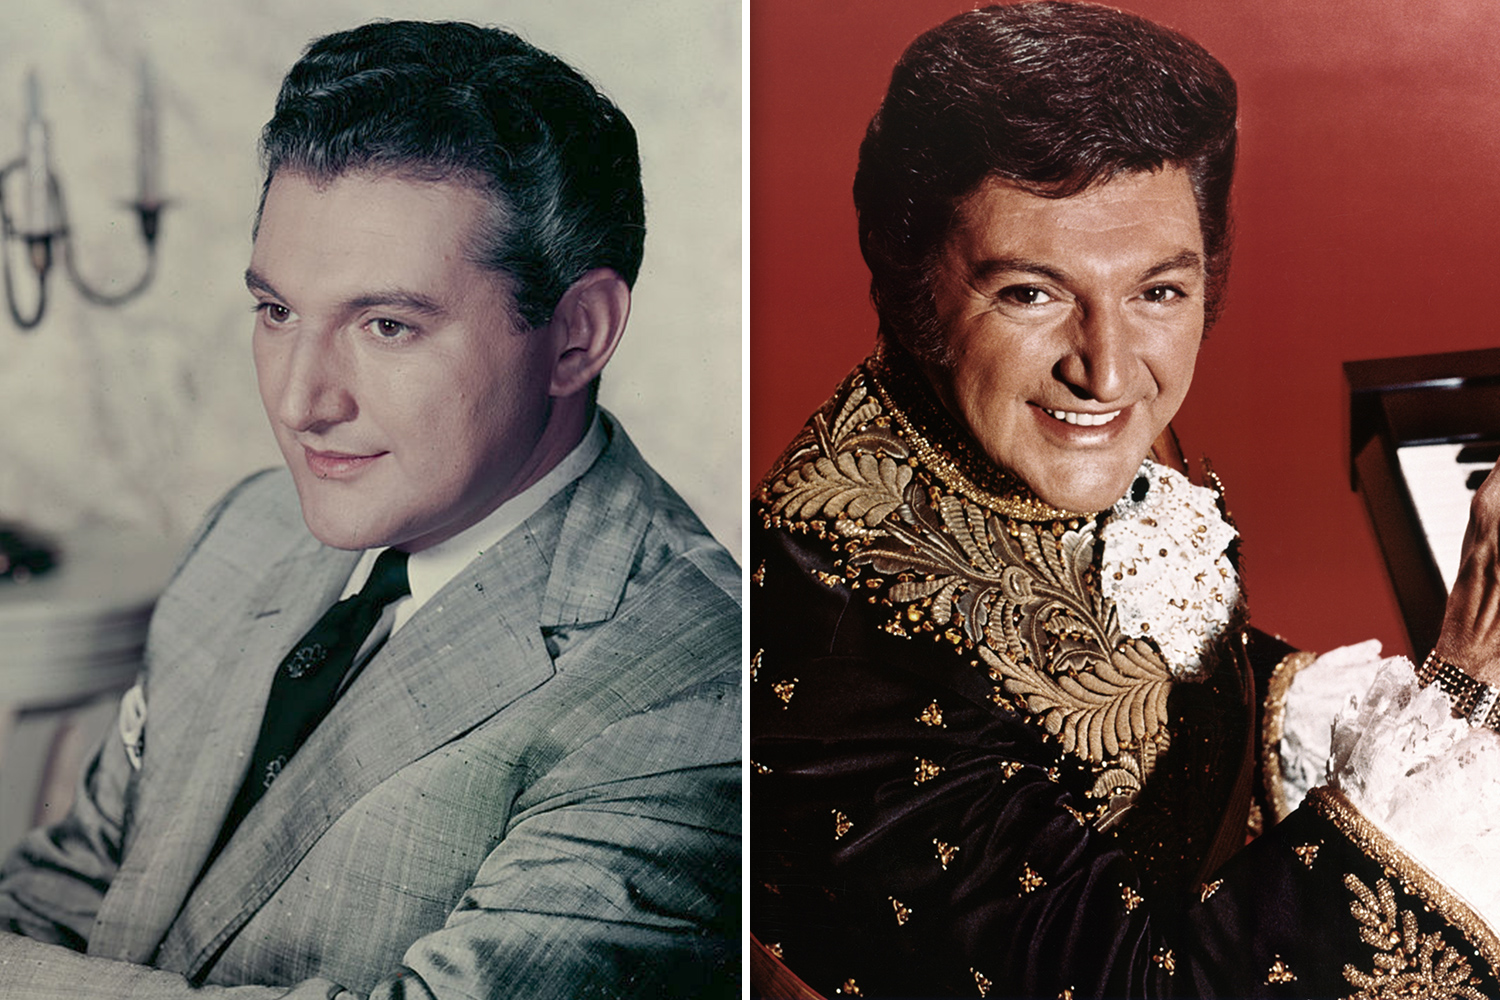 How did Liberace die and what was the cause of his death?